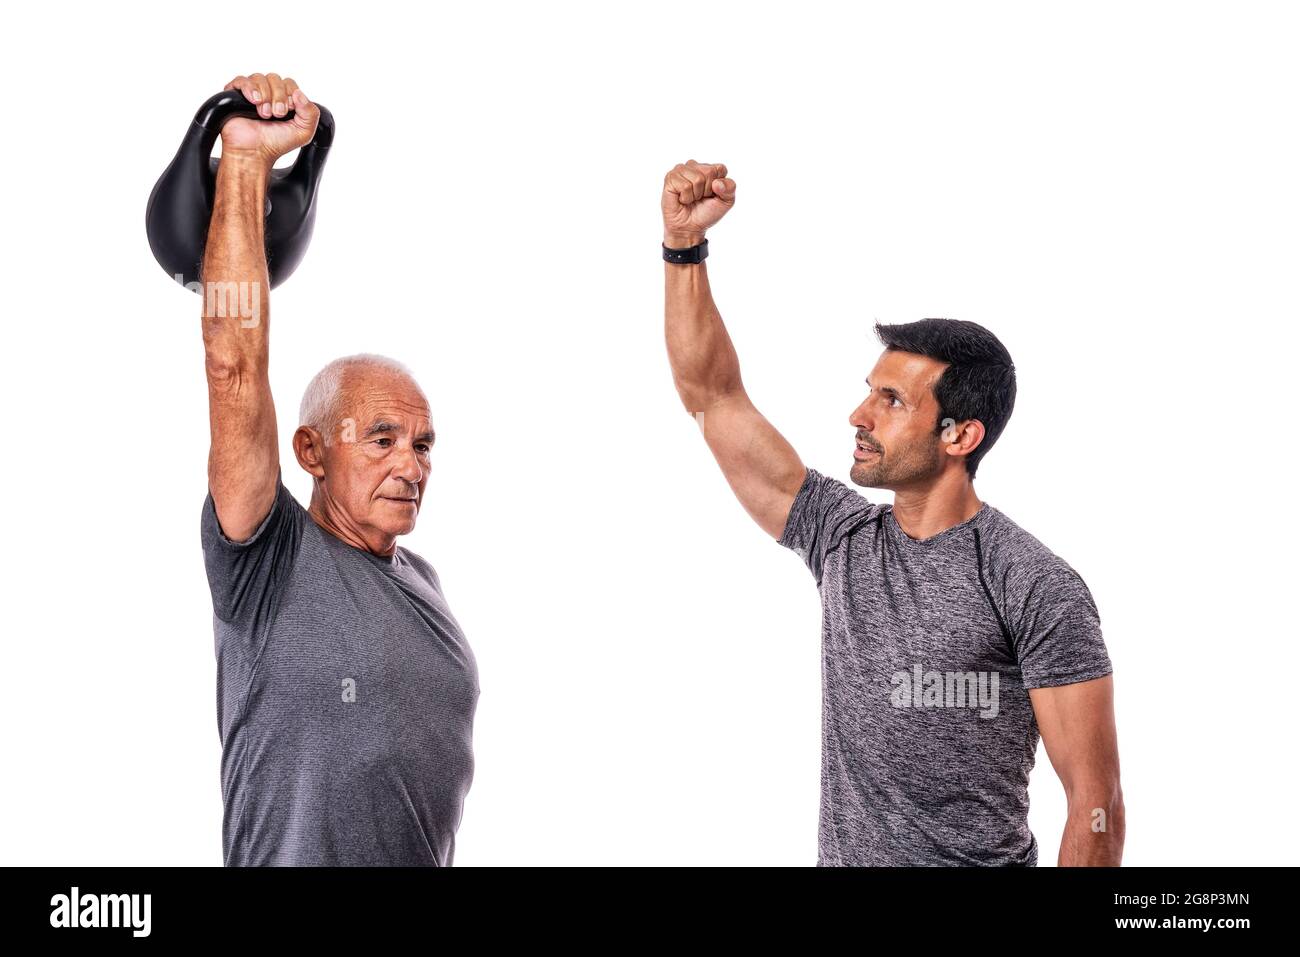 Old man with a middle-aged personal trainer is conducting a fitness workout. On an isolated white background. White background. Stock Photo